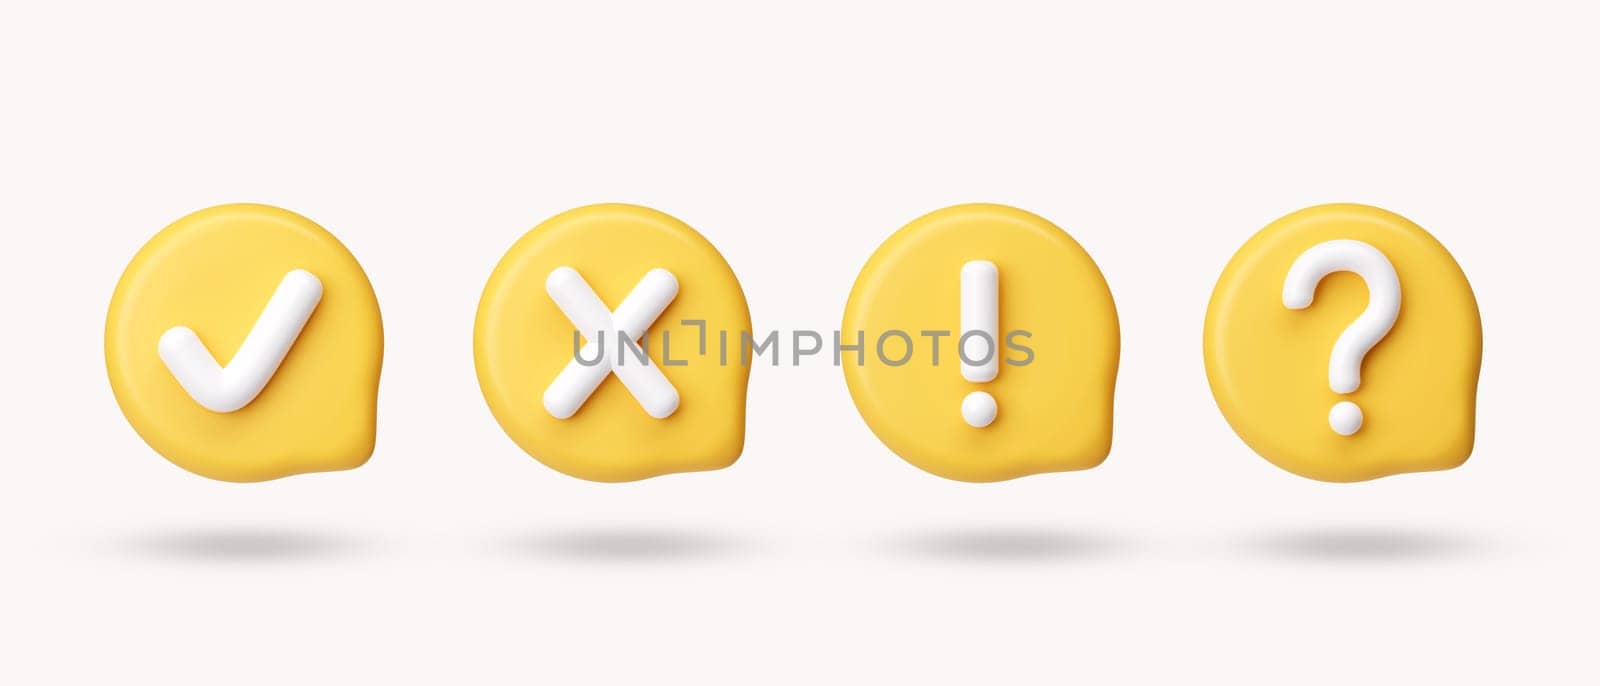 3d multiply, check mark, question, attention. icon isolated on white background. 3d rendering illustration. Clipping path. by meepiangraphic